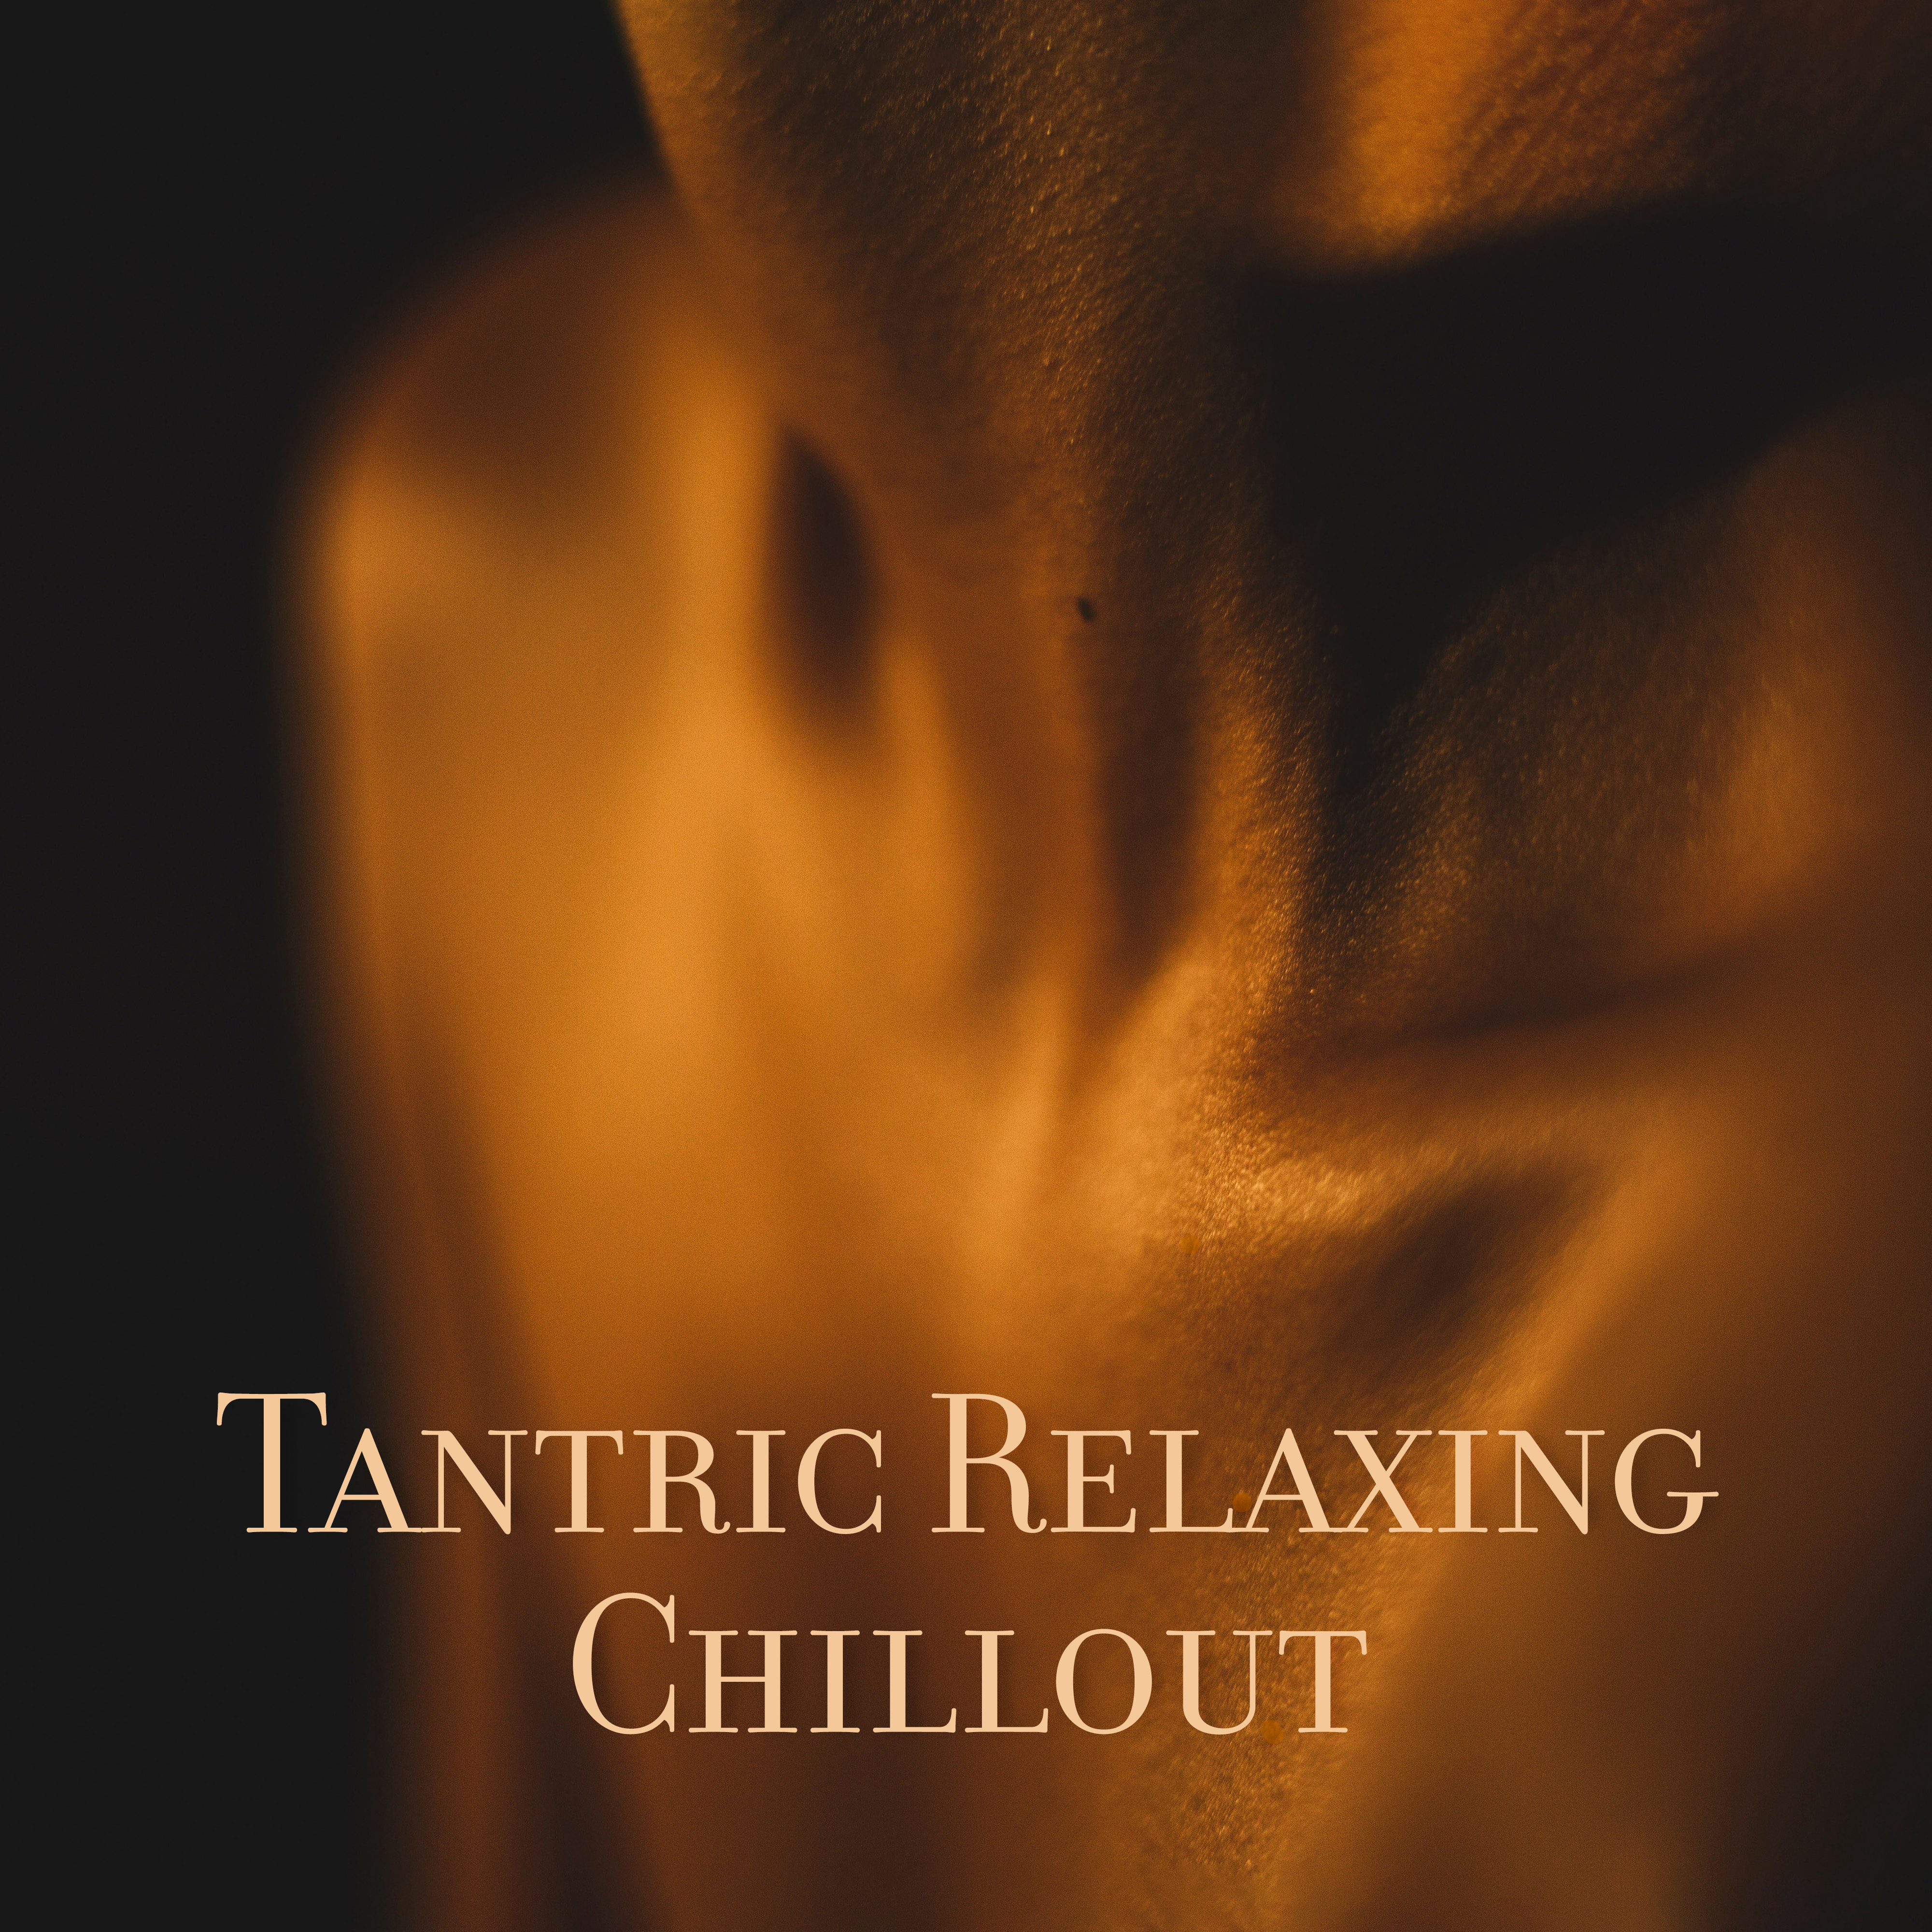 Tantric Relaxing Chillout